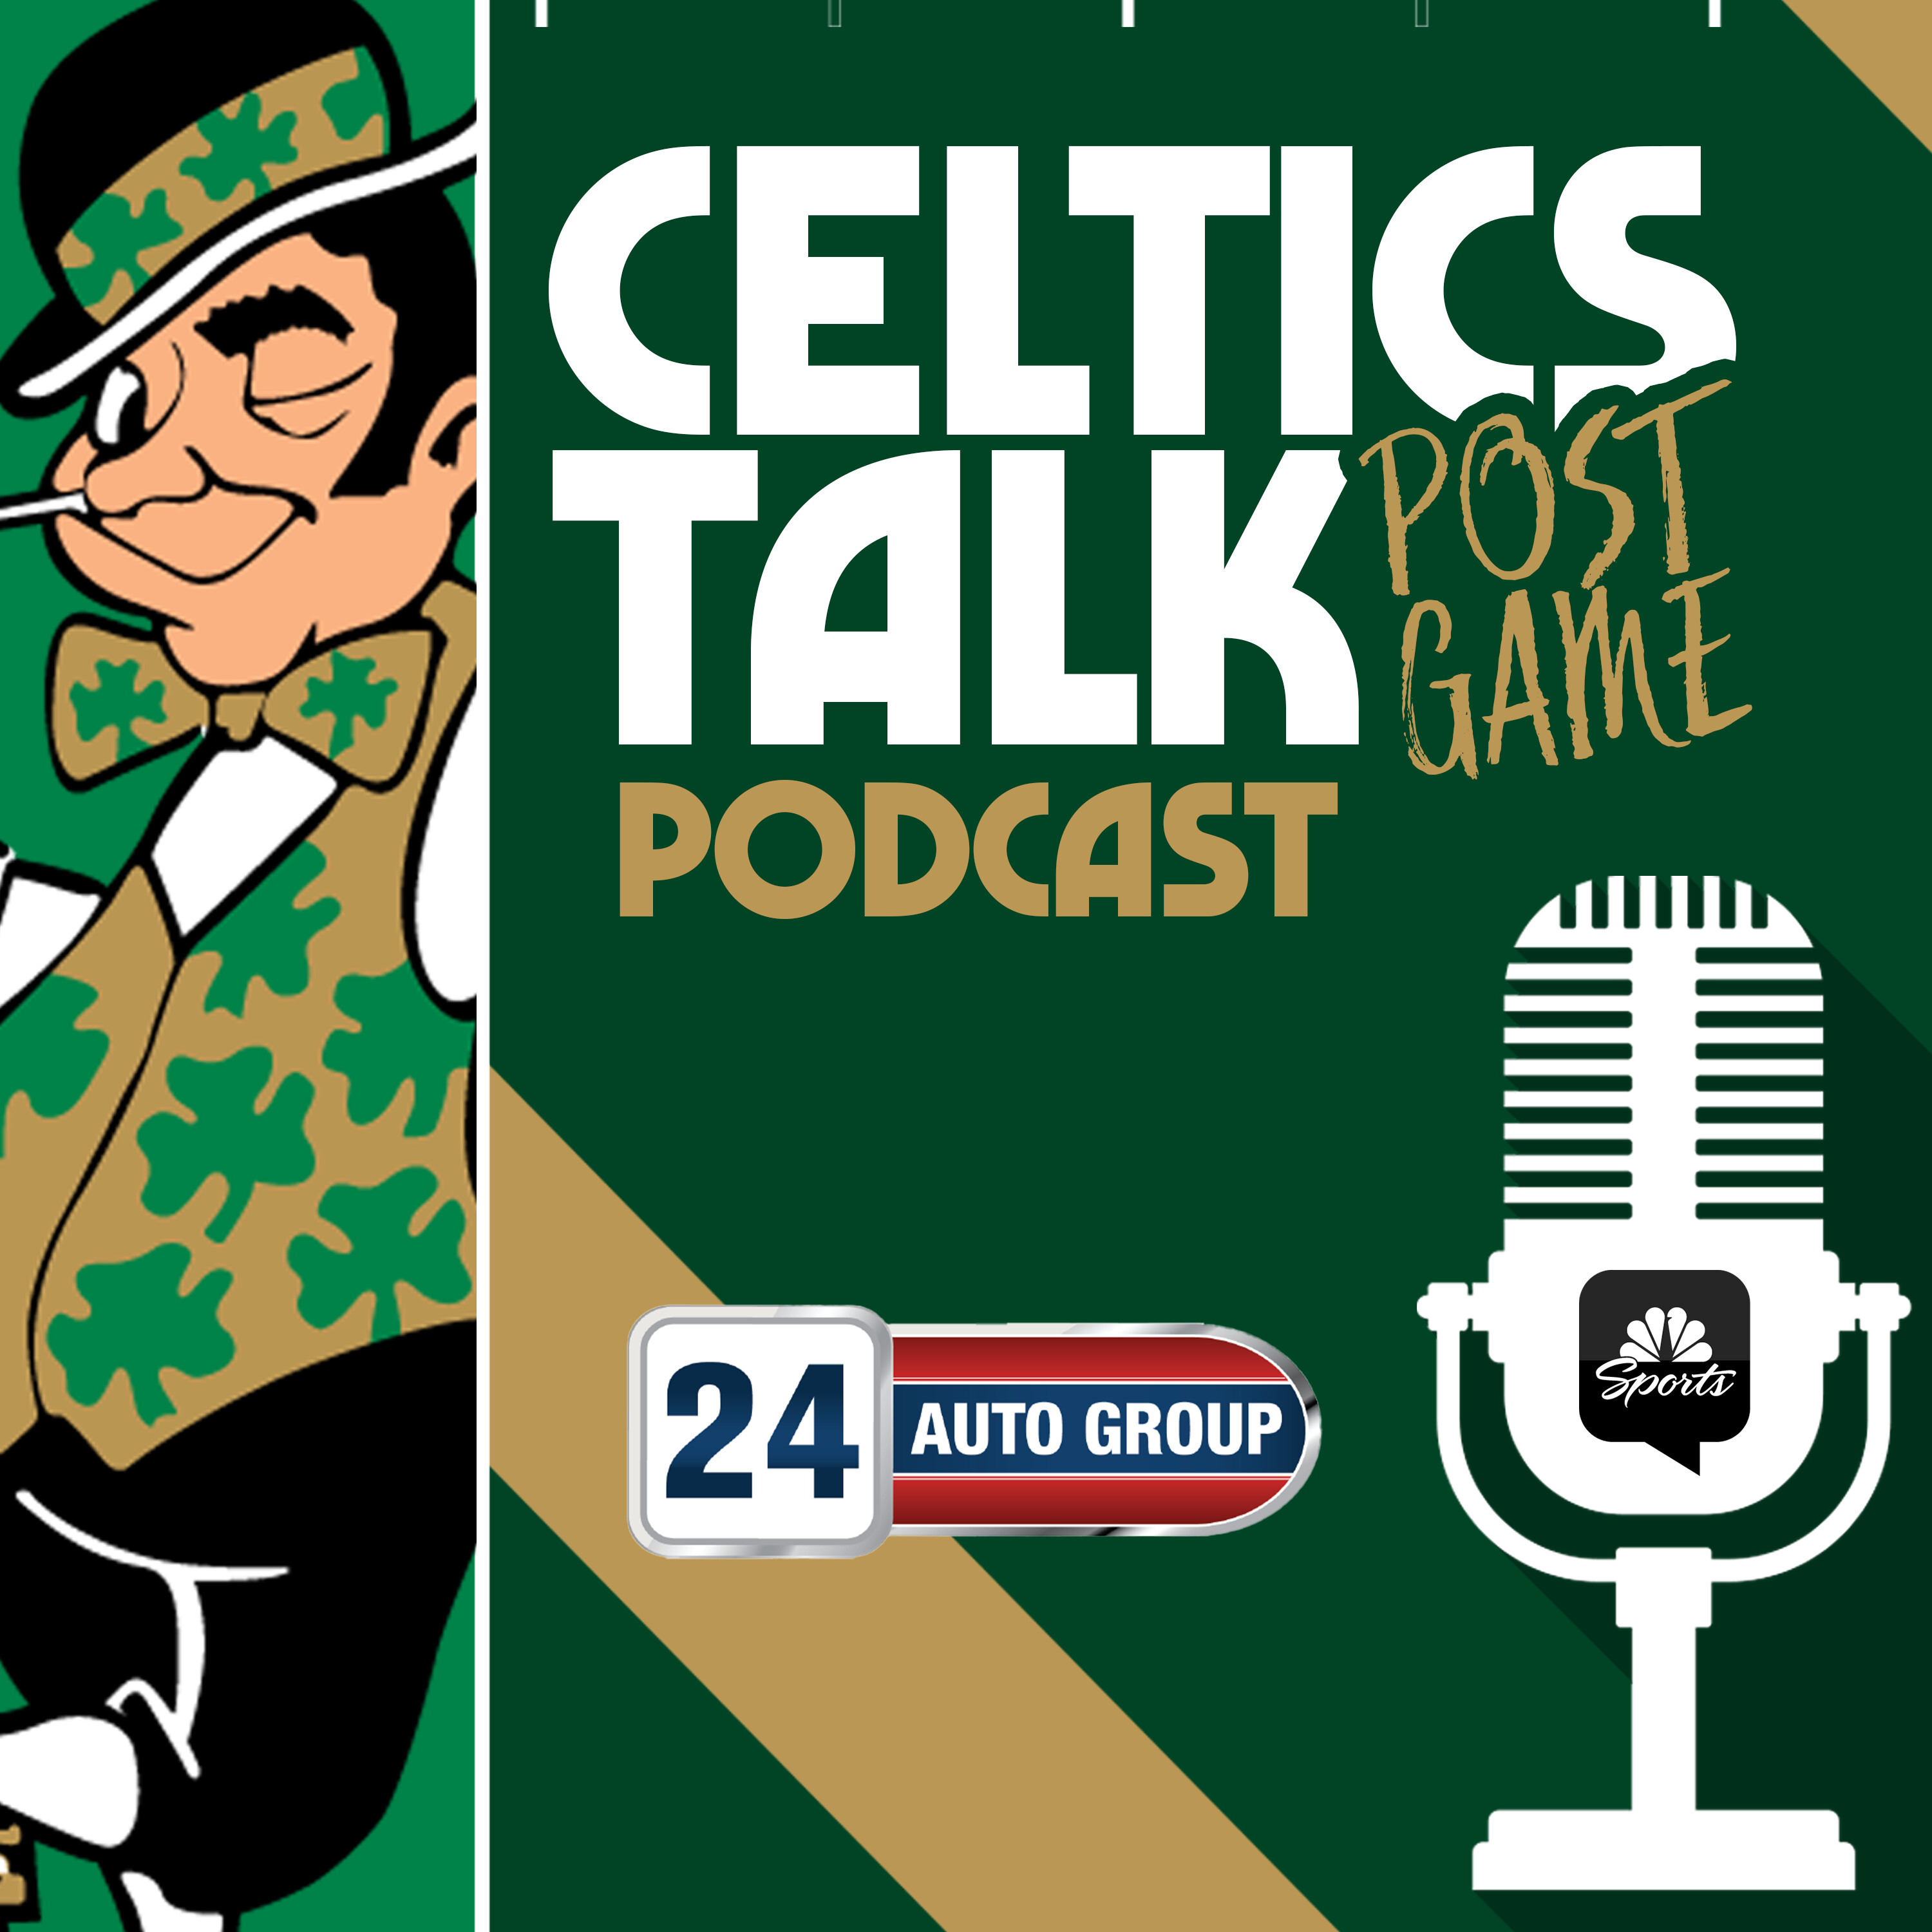 POSTGAME POD: Catastrophic third quarter costs Celtics in Game 1 loss to Heat